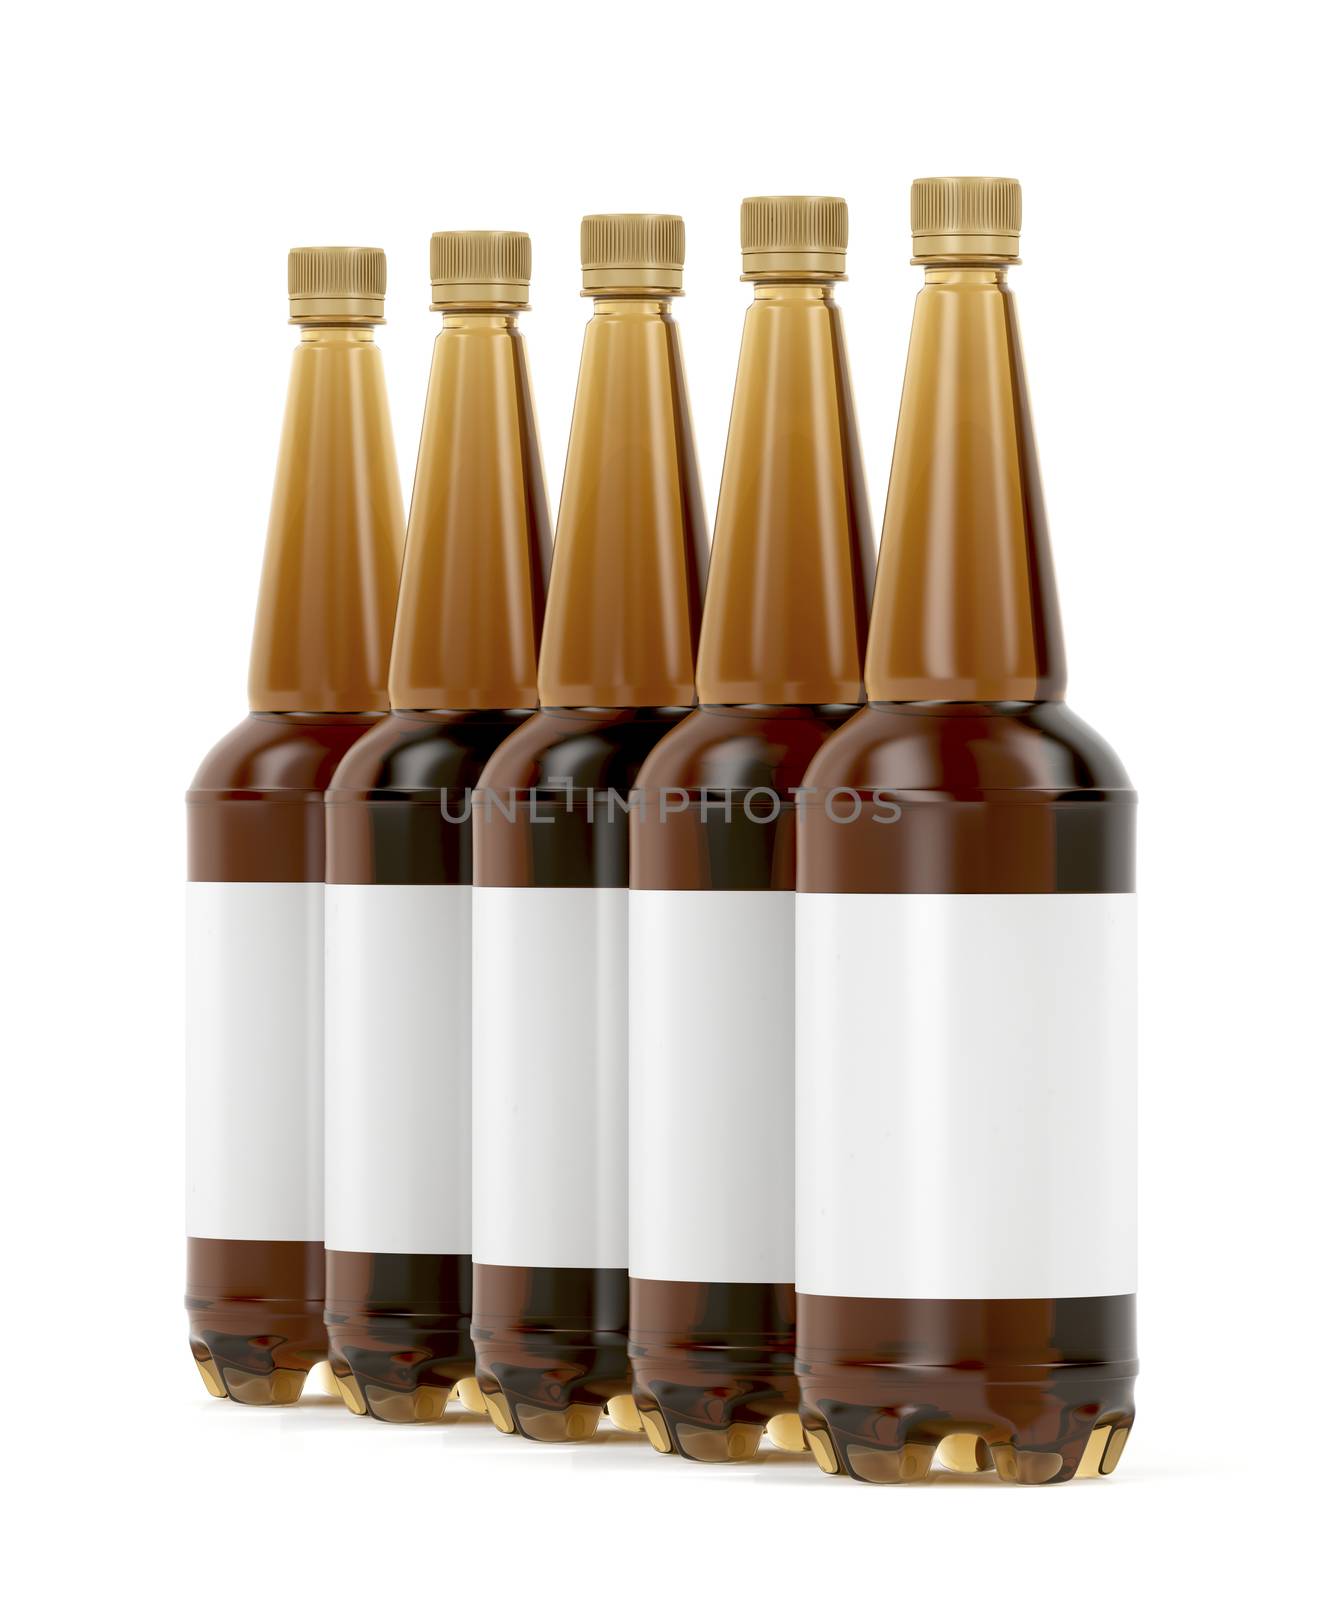 Beer bottles with blank labels  by magraphics